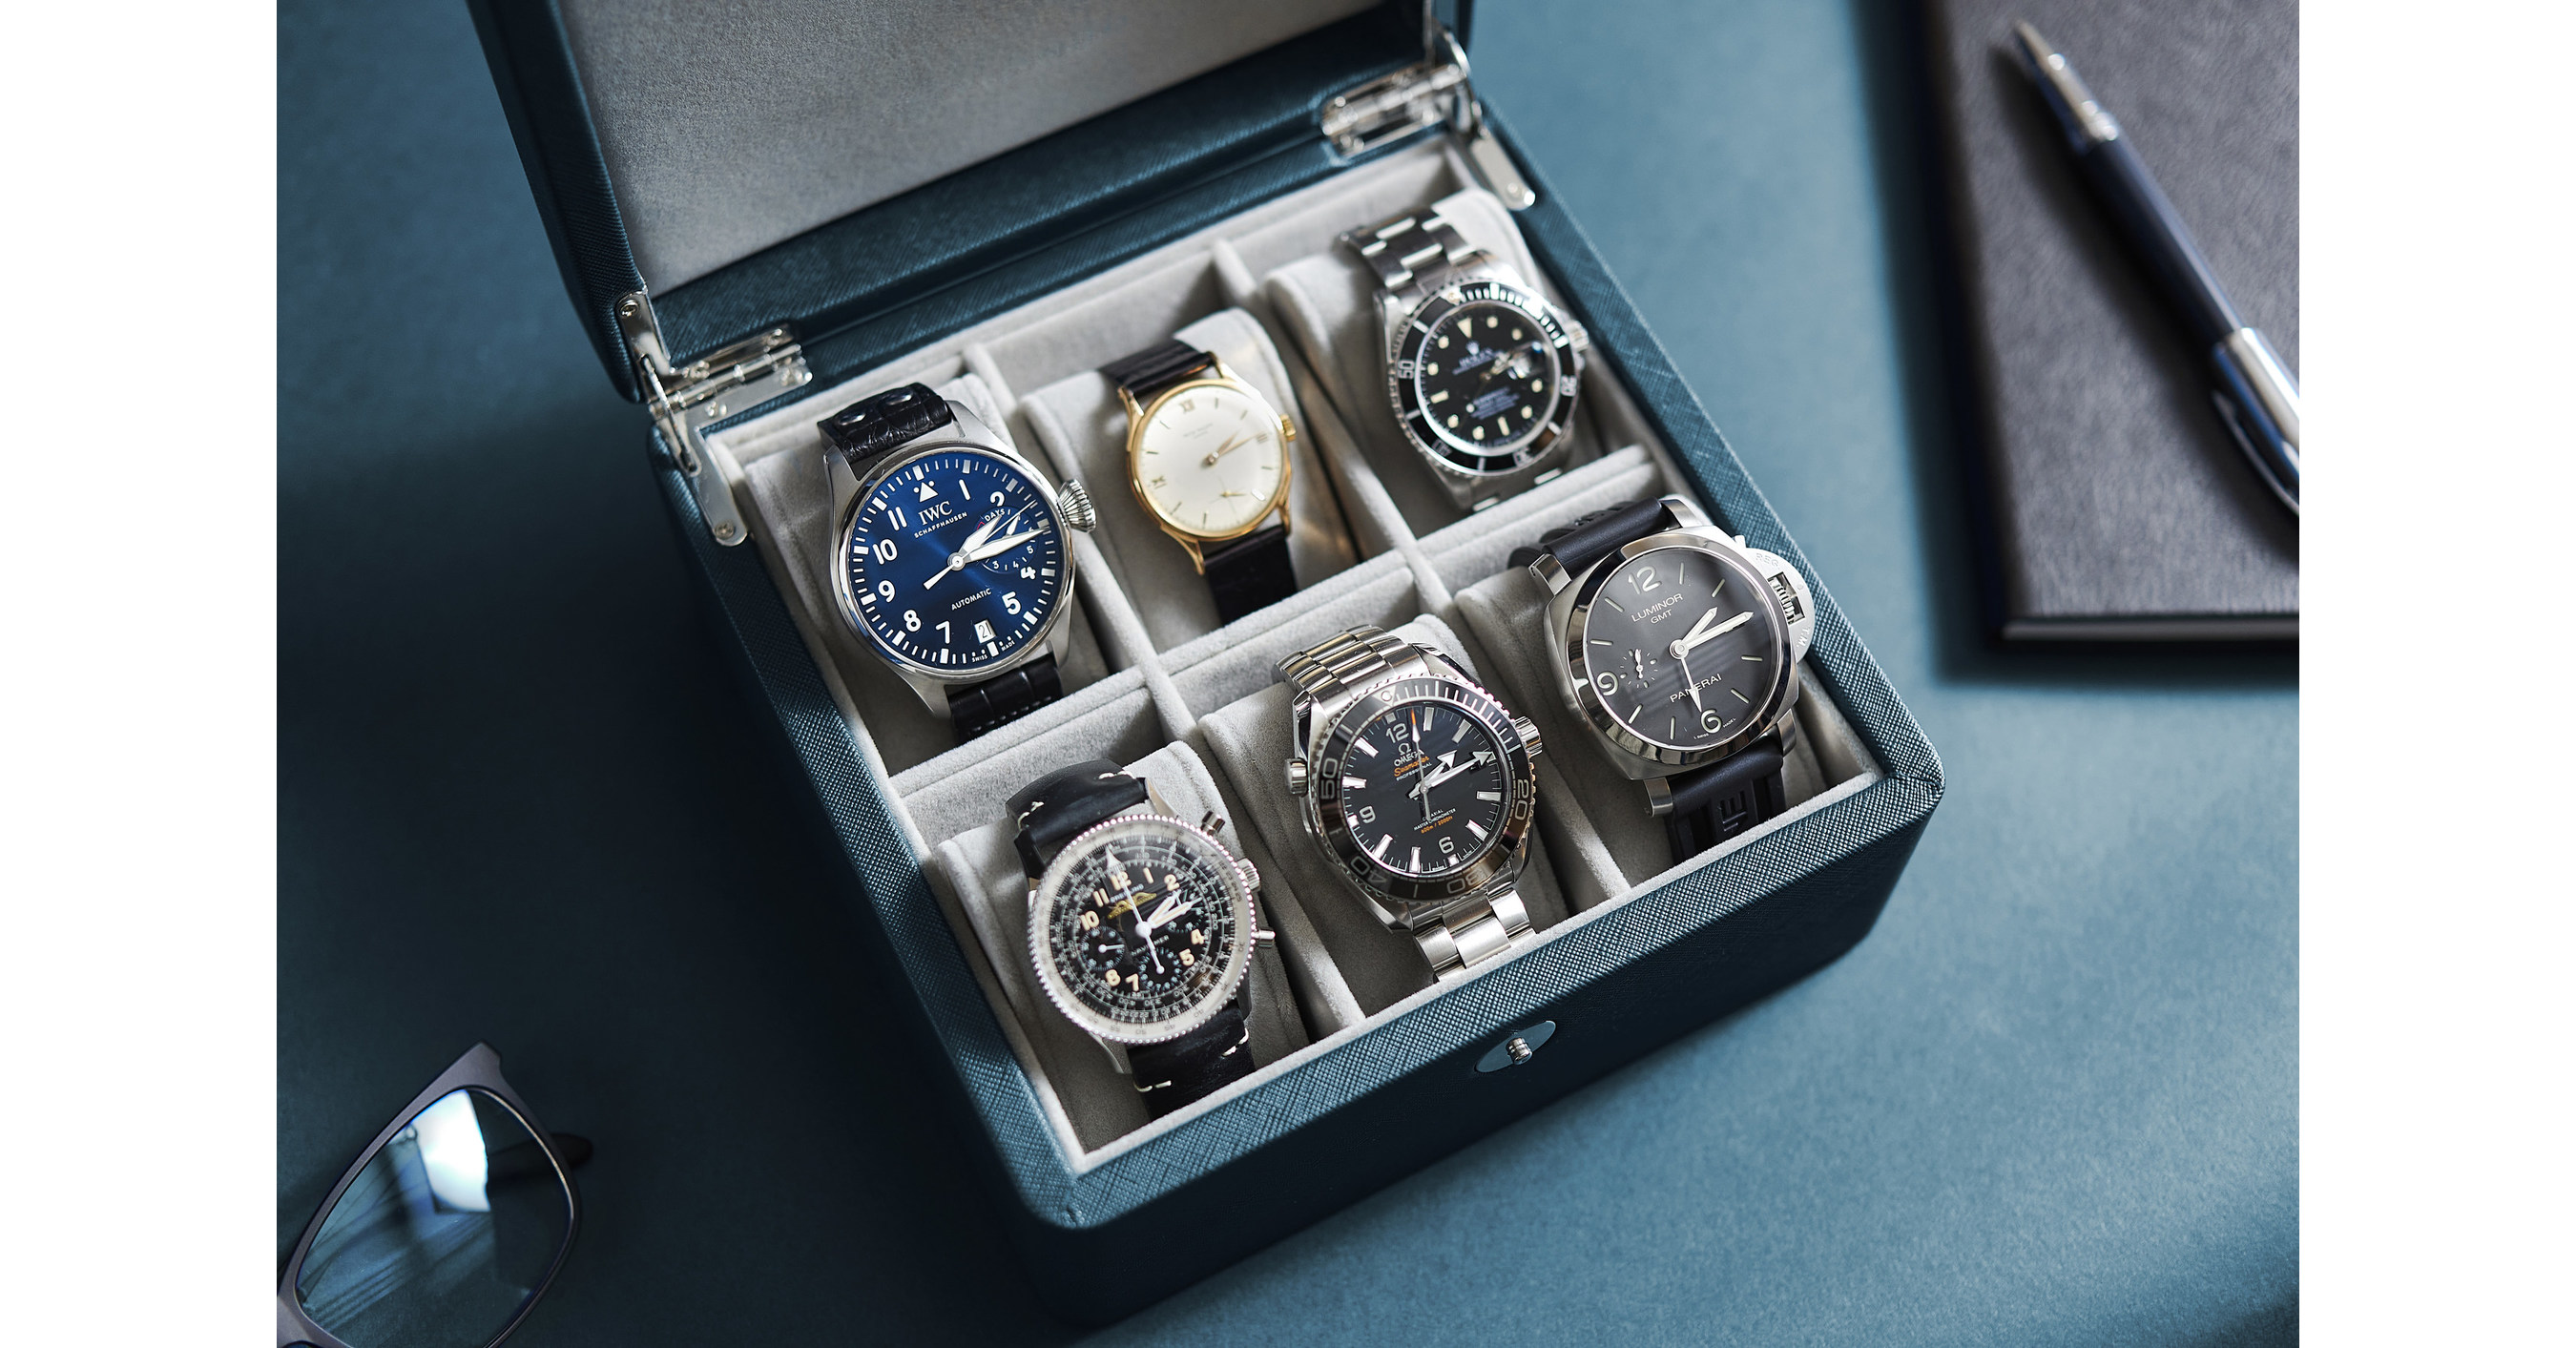 Has Expanded its Authentication Services from Watches and